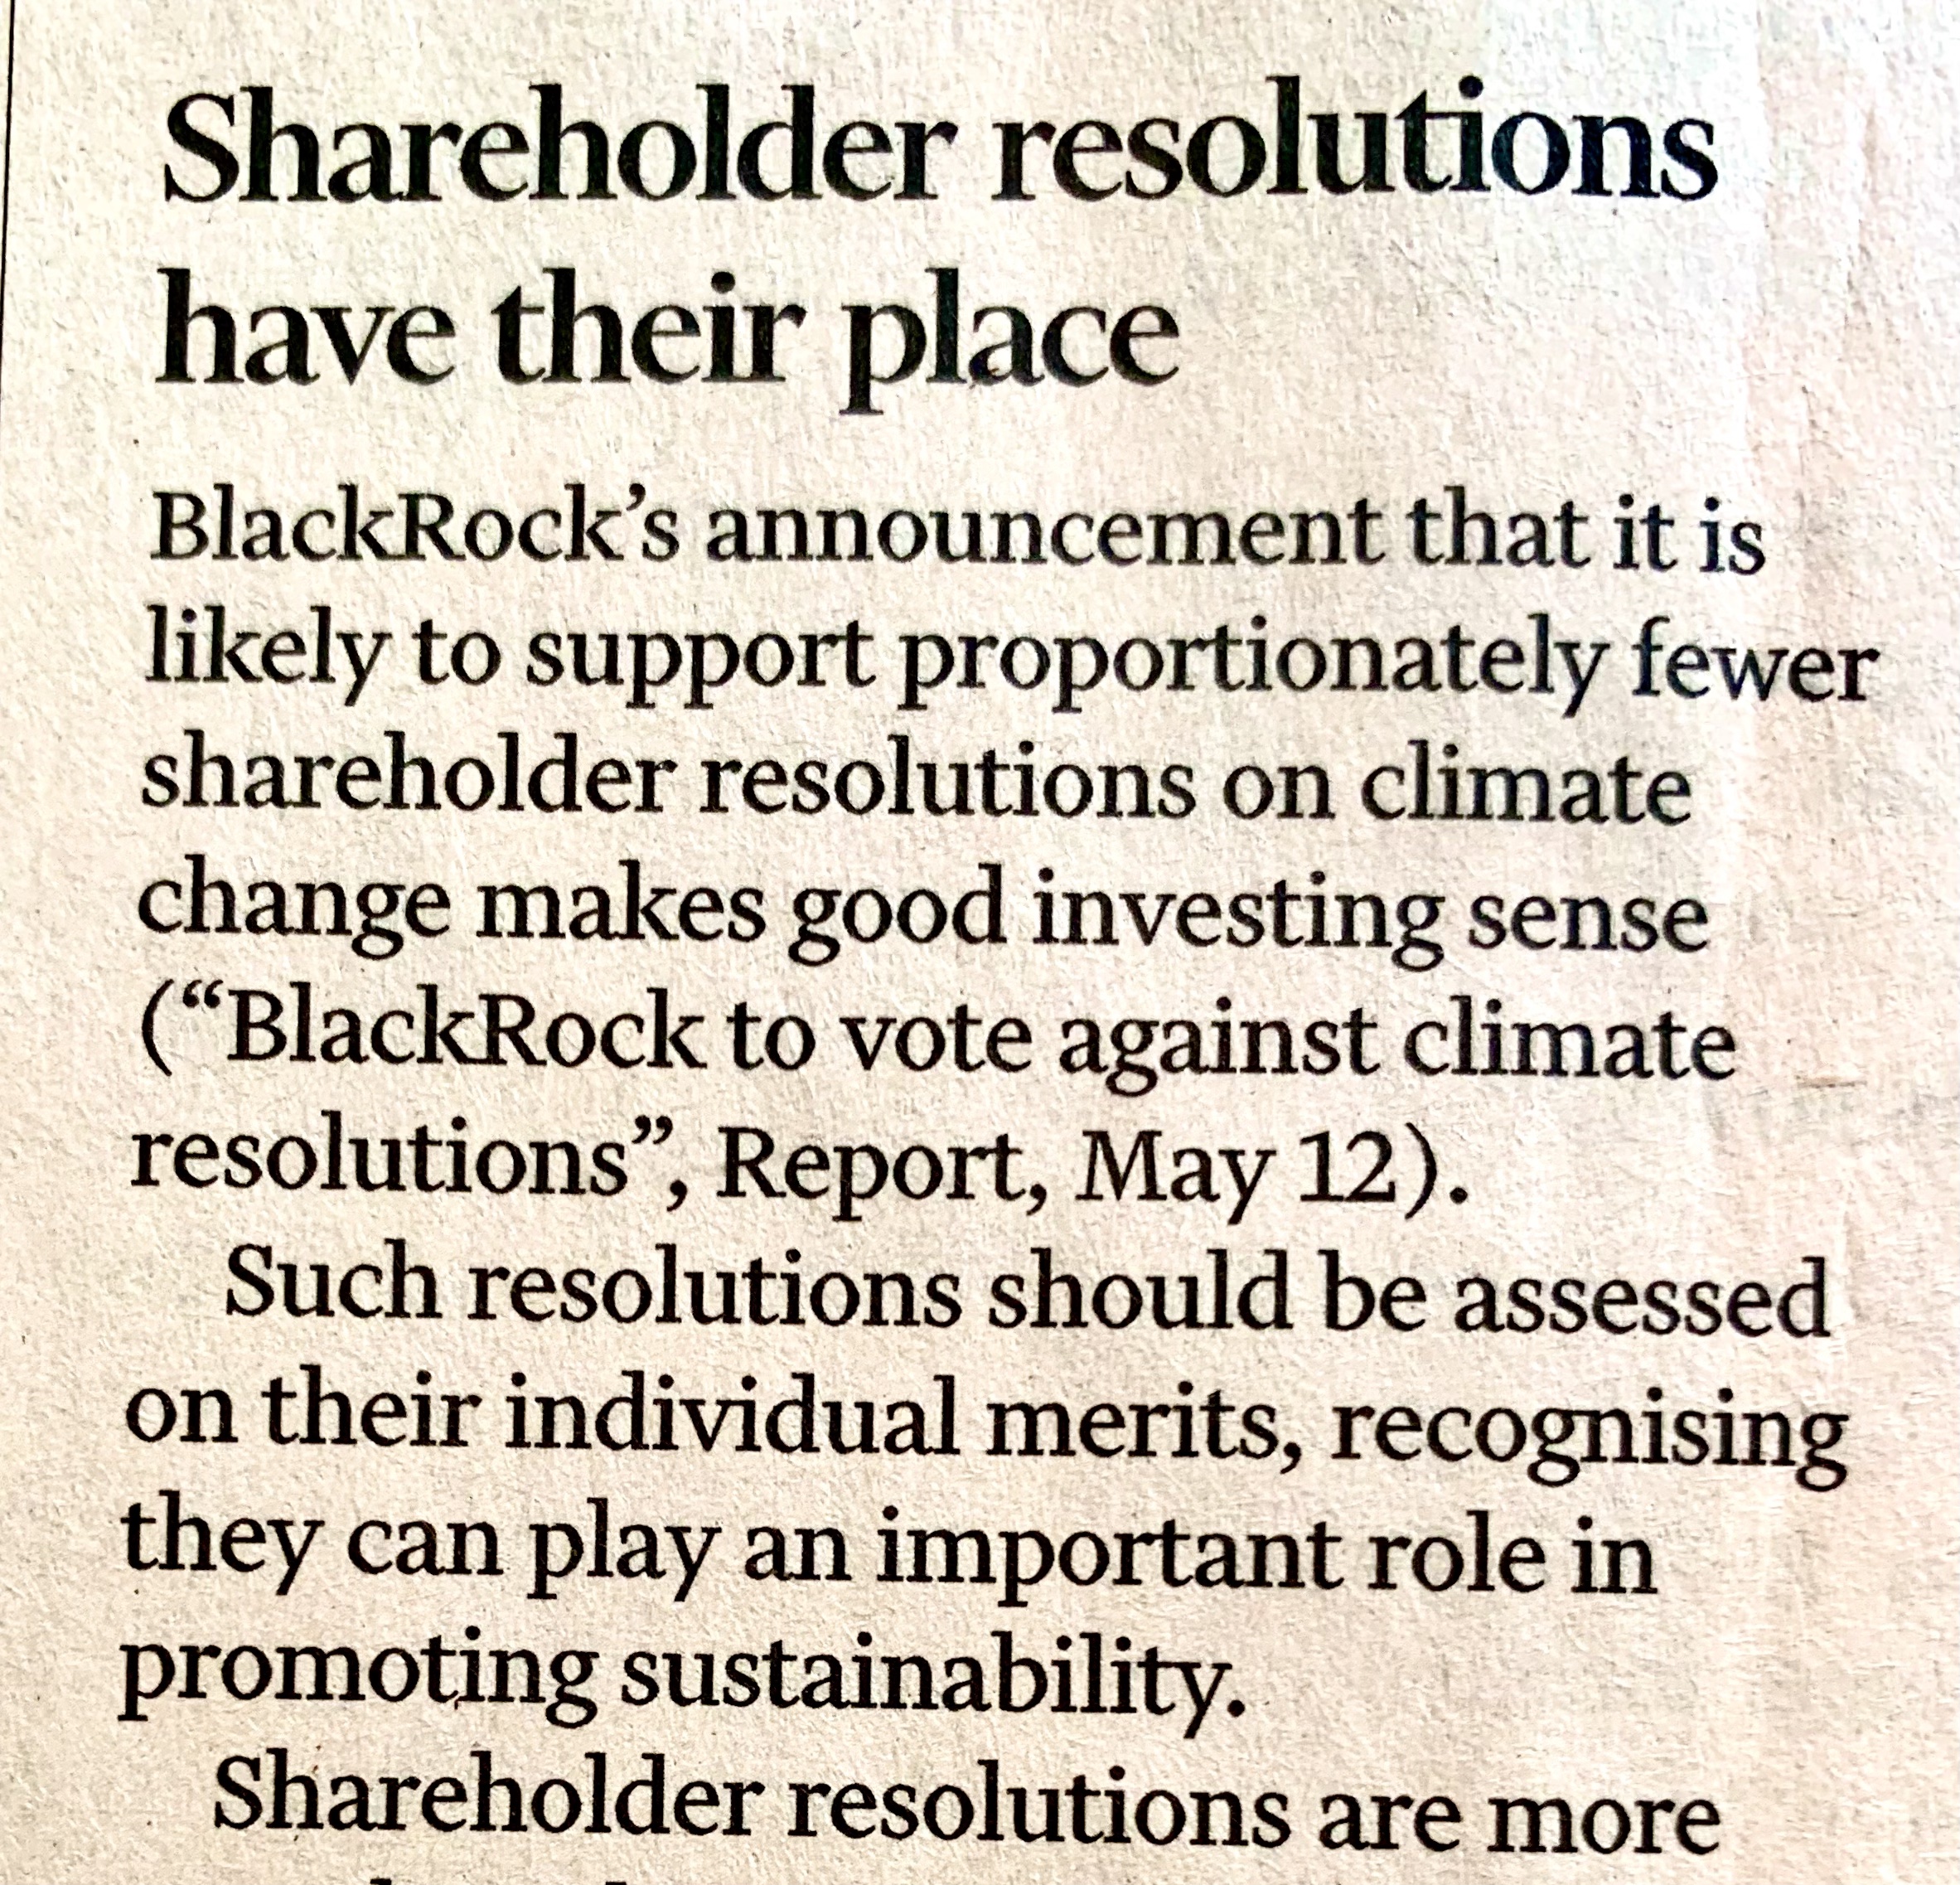 Shareholder resolutions have their place